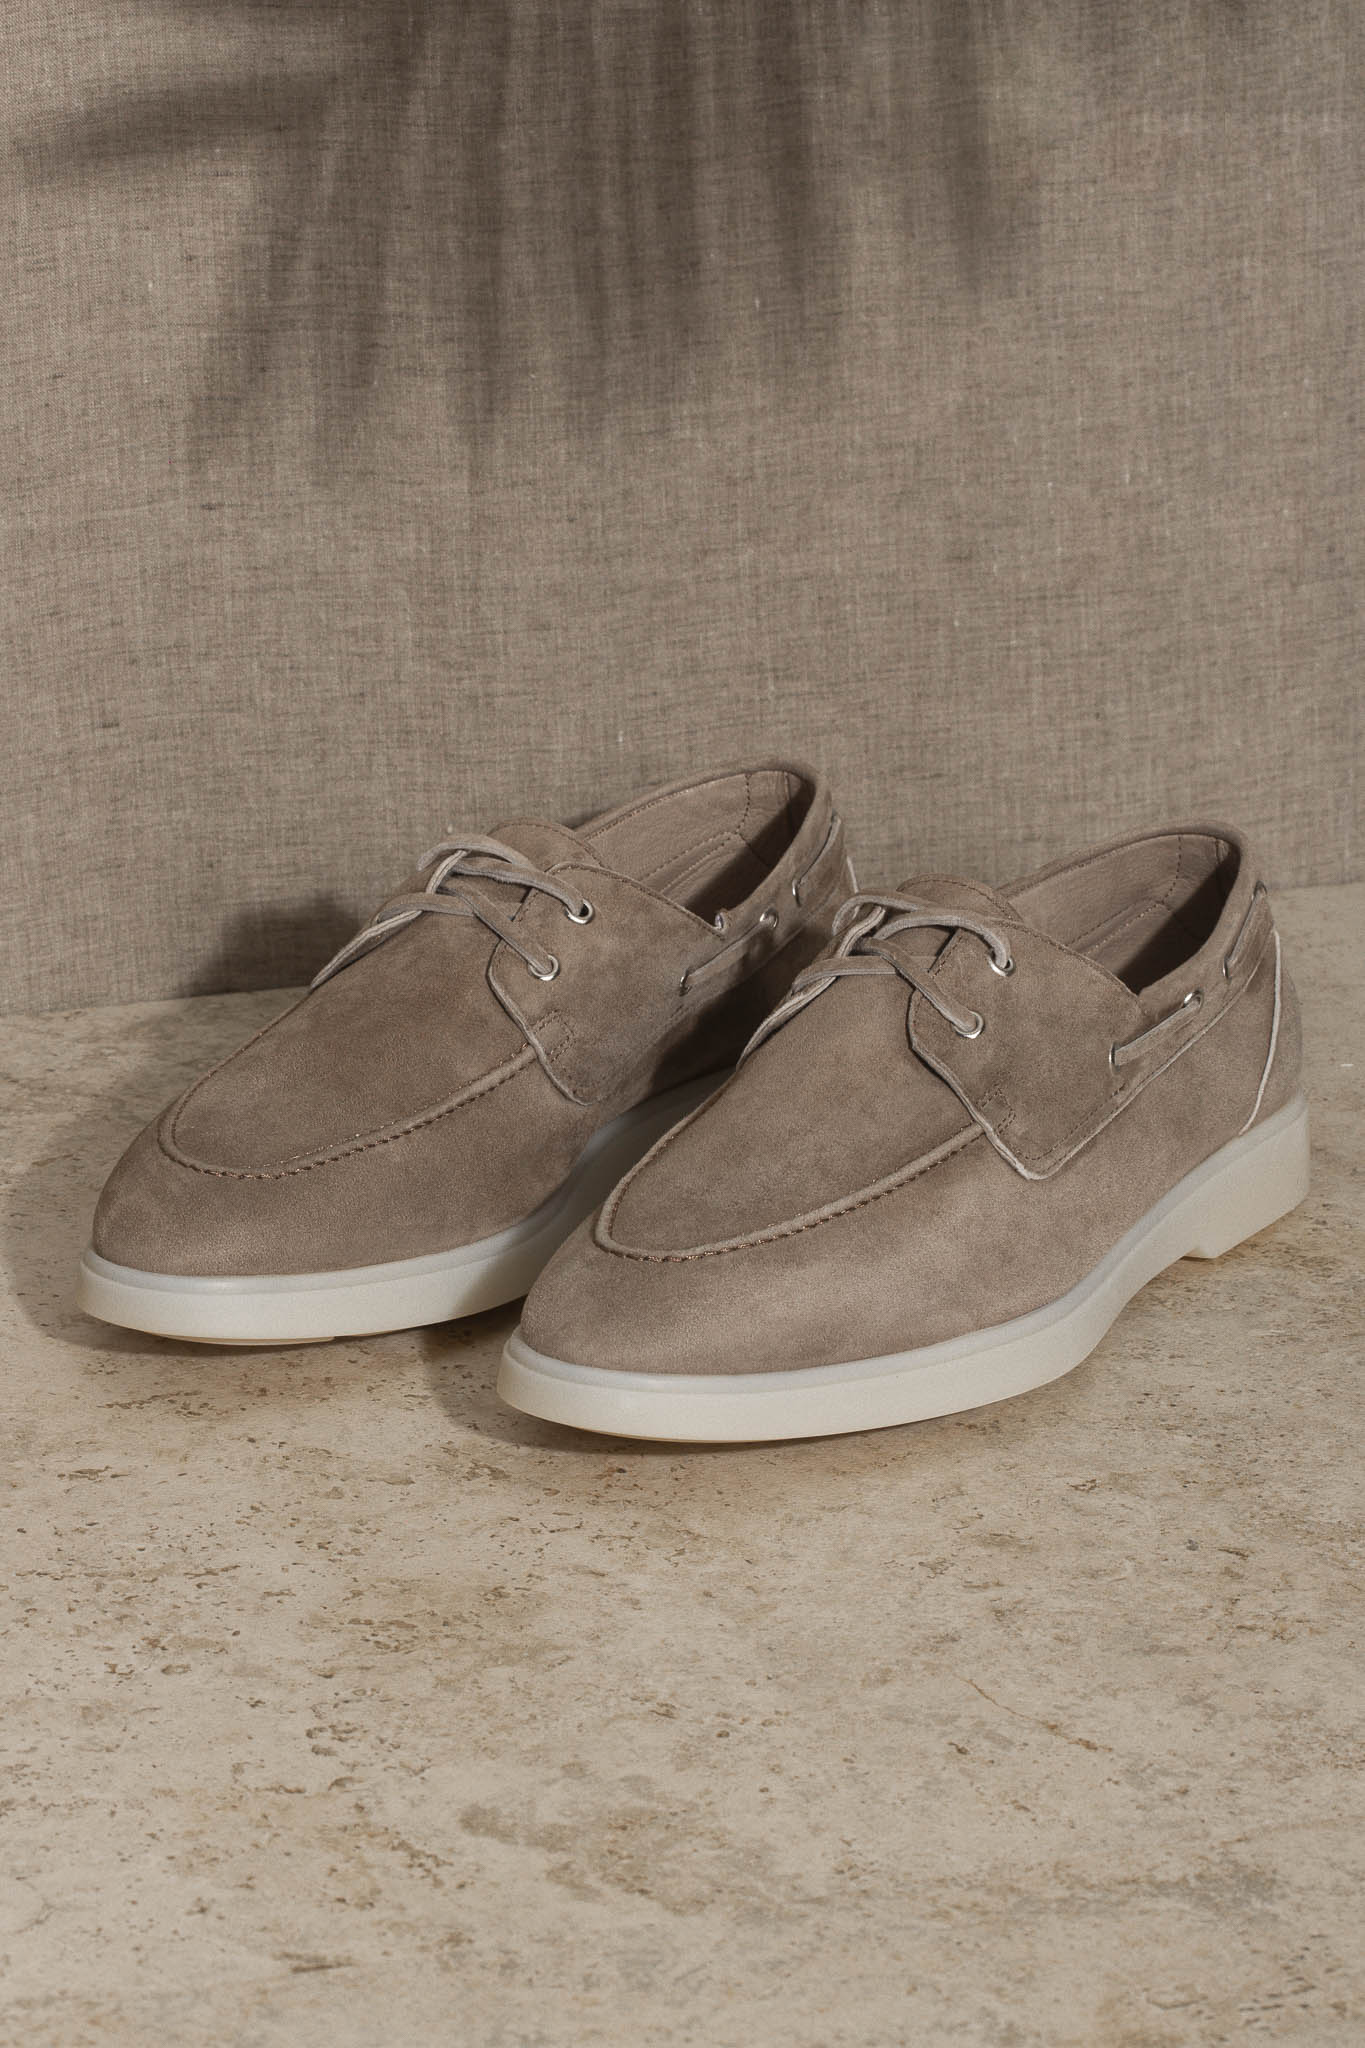 Boat shoes ,taupe  boat shoes, summer boat shoes taupe, chaussure taupe bateau été, chaussures bateau taupe hommes, men taupe boat shoes, scarpa da barca taupe estiva, scarpa da barca uomo taupe